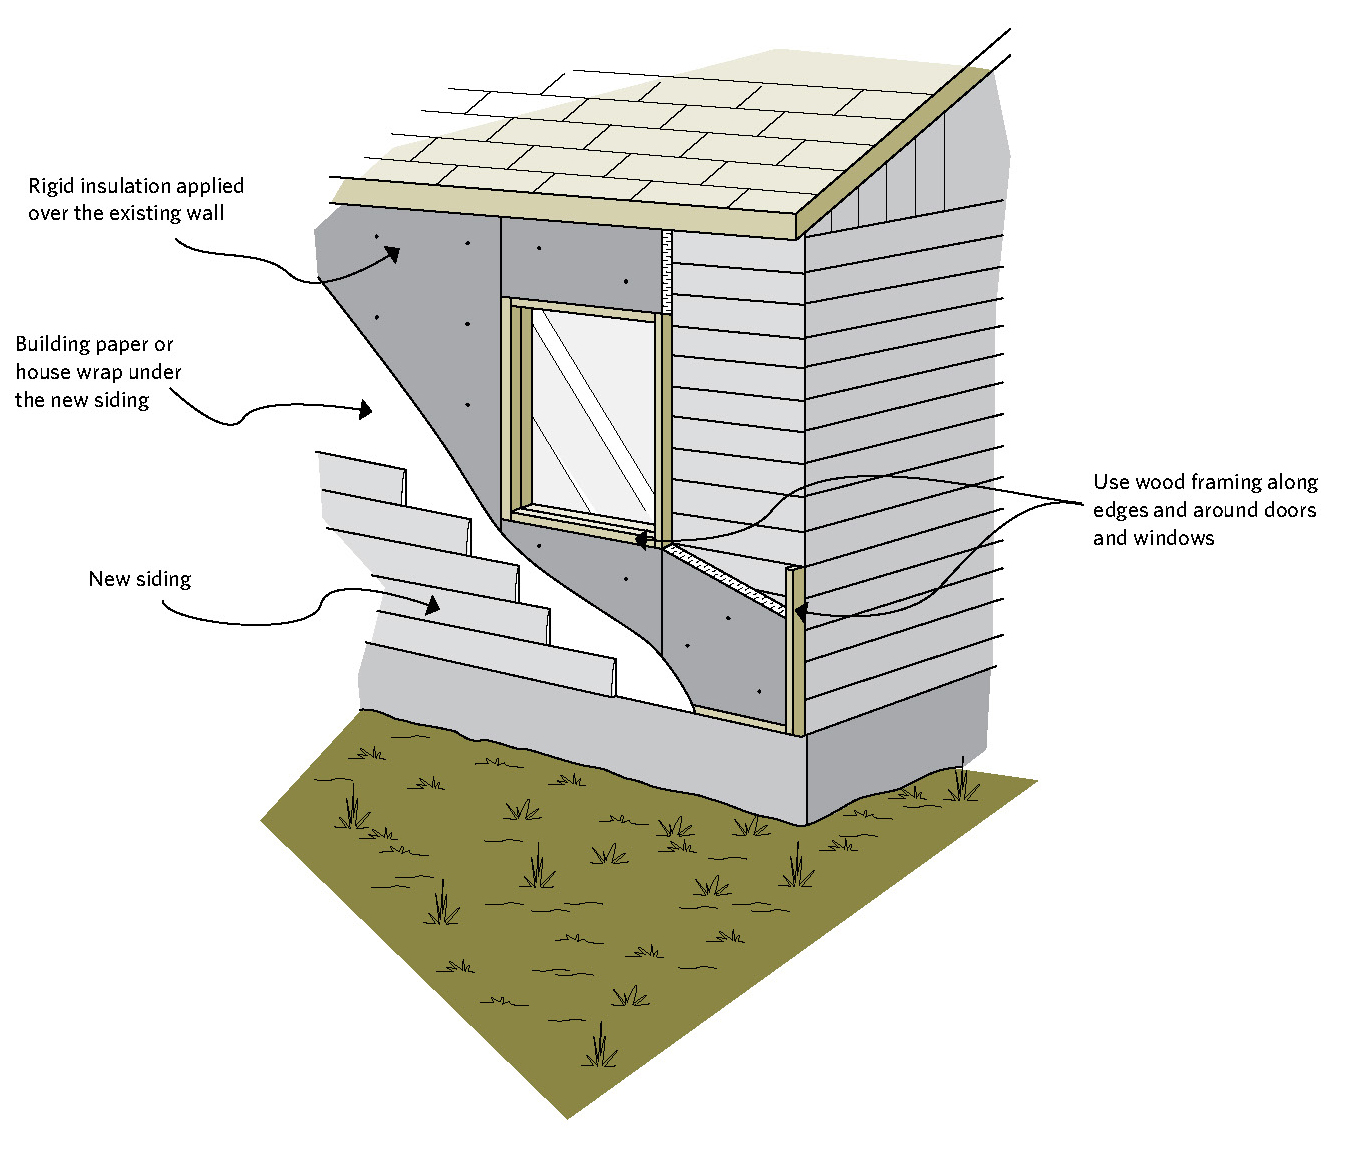 Figure 7-8 Adding insulation to the exterior; Rigid insulation applied over the existing wall; Building paper or house wrap under new siding; New siding; Use wood framing along edges and around doors and windows